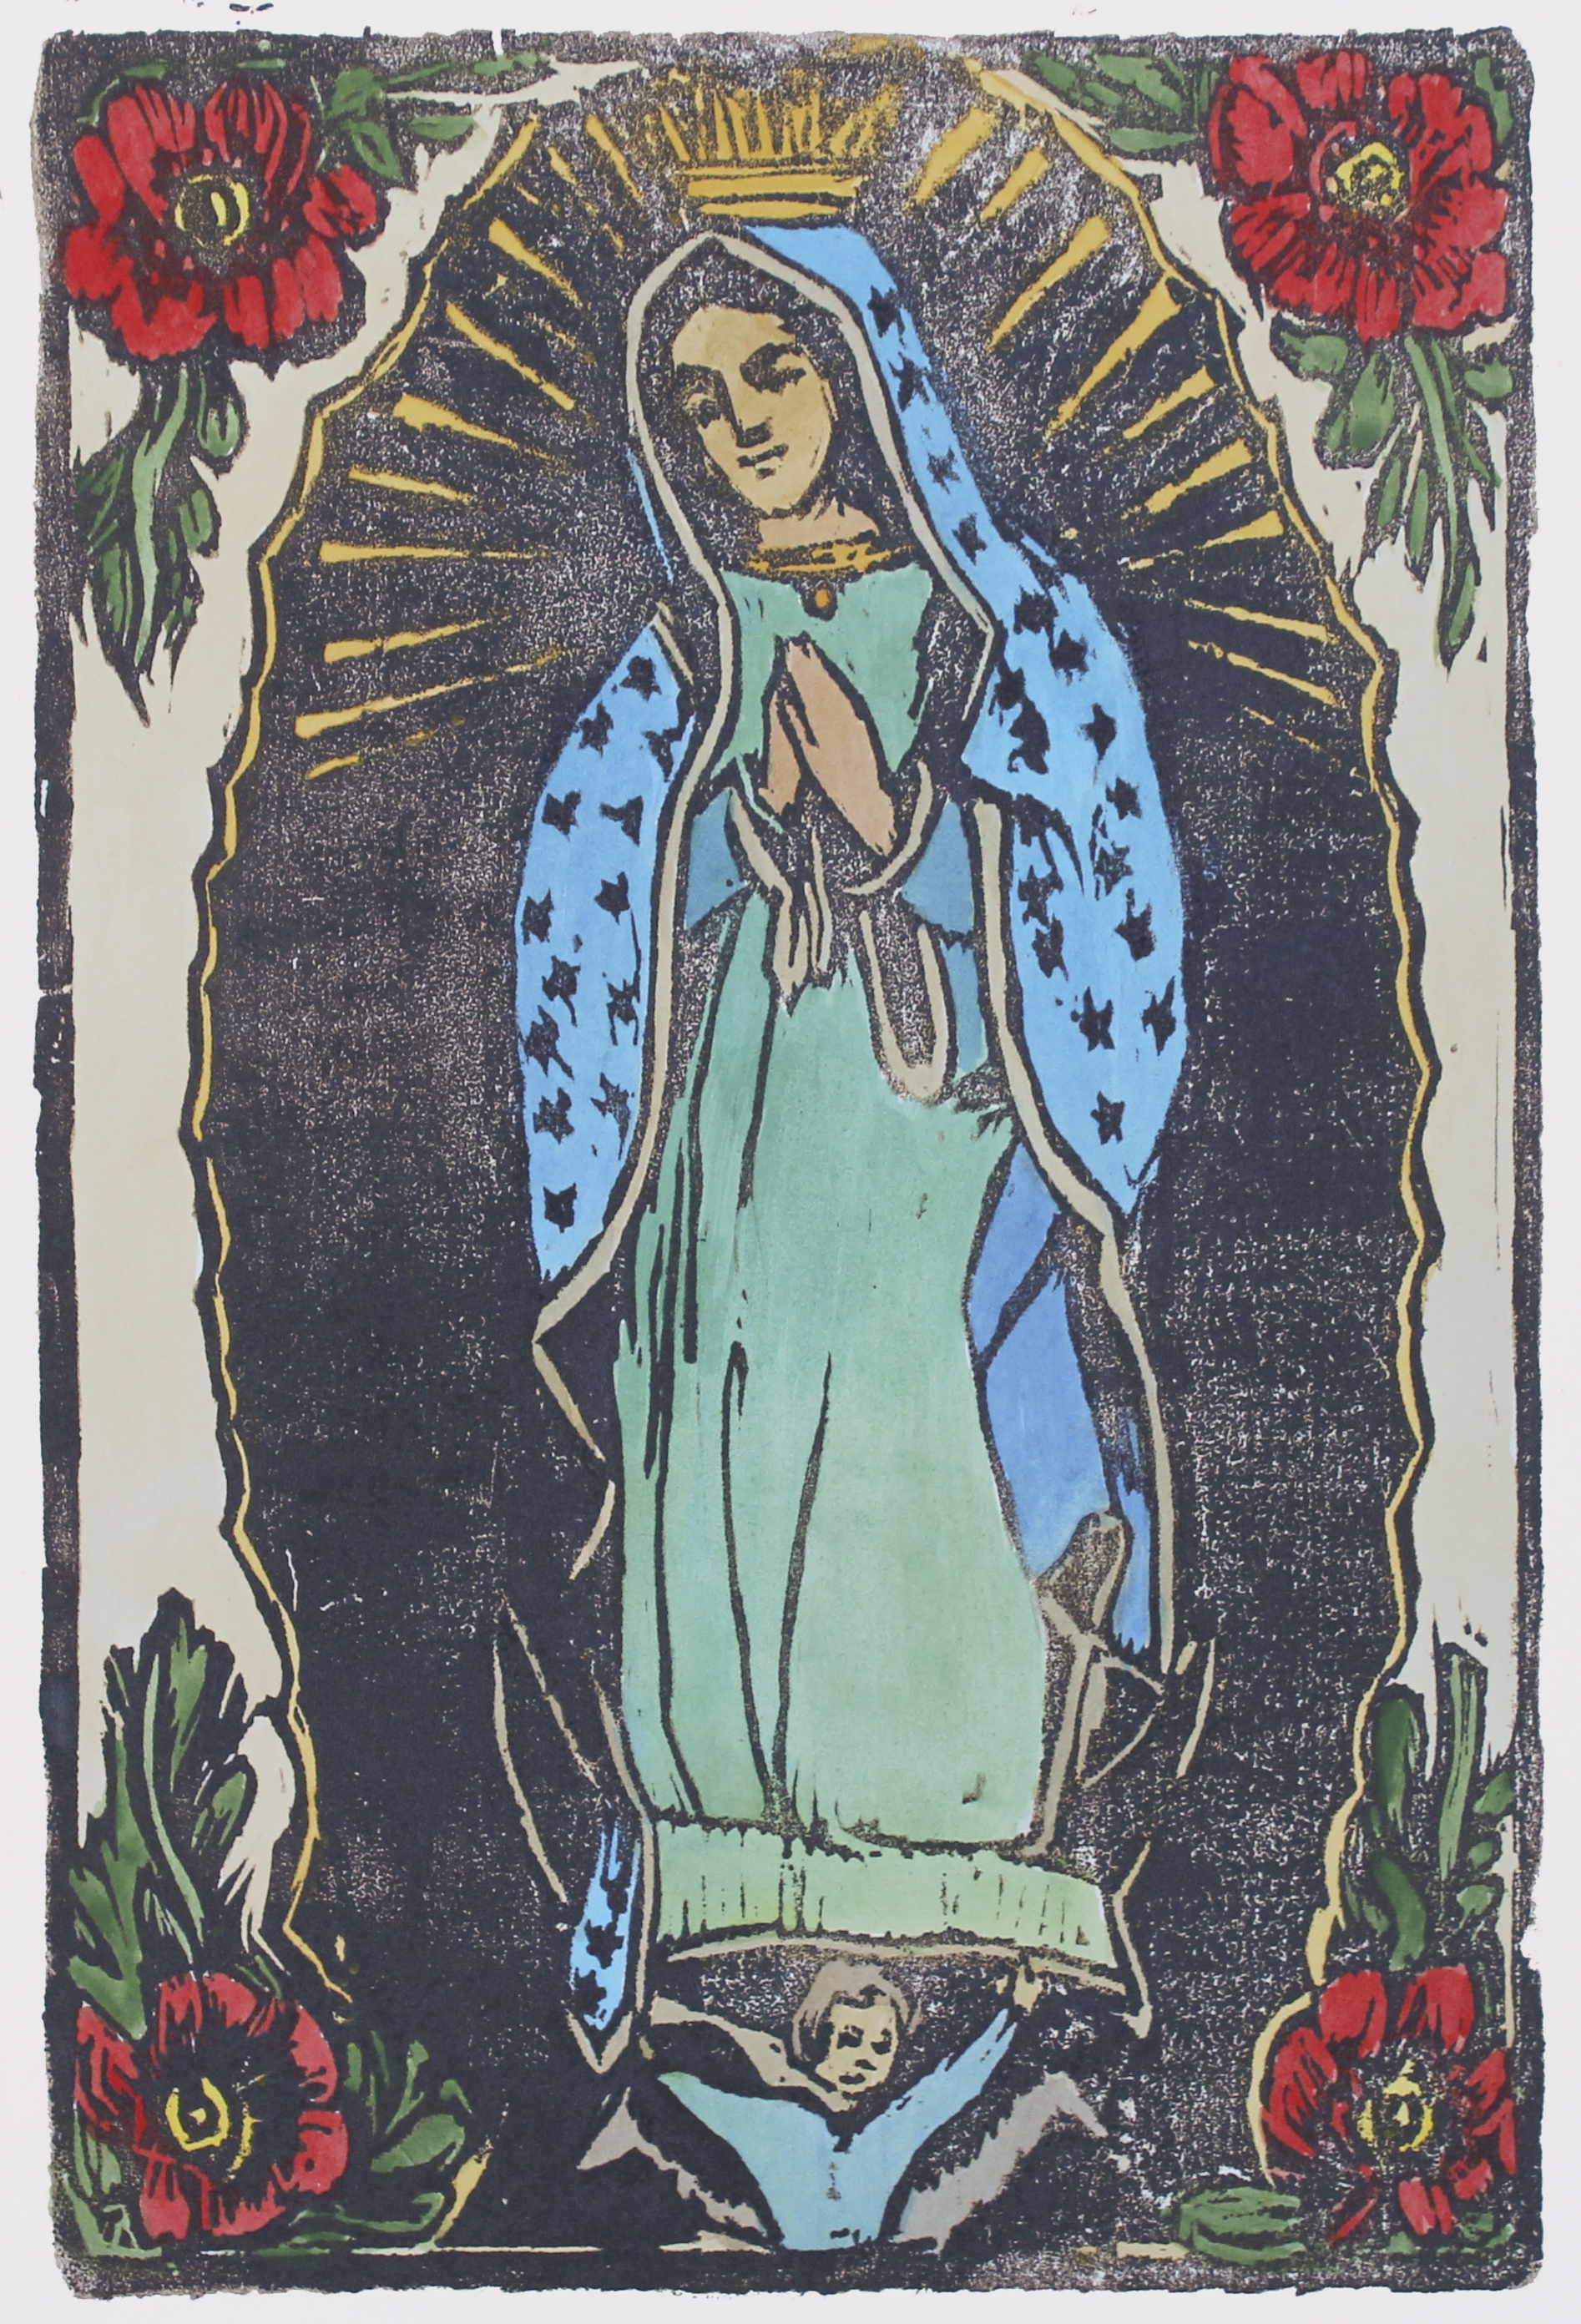   Our Lady of Guadalupe  woodblock print with hand-coloring edition of 1 12x8" 2017  private collection CA 